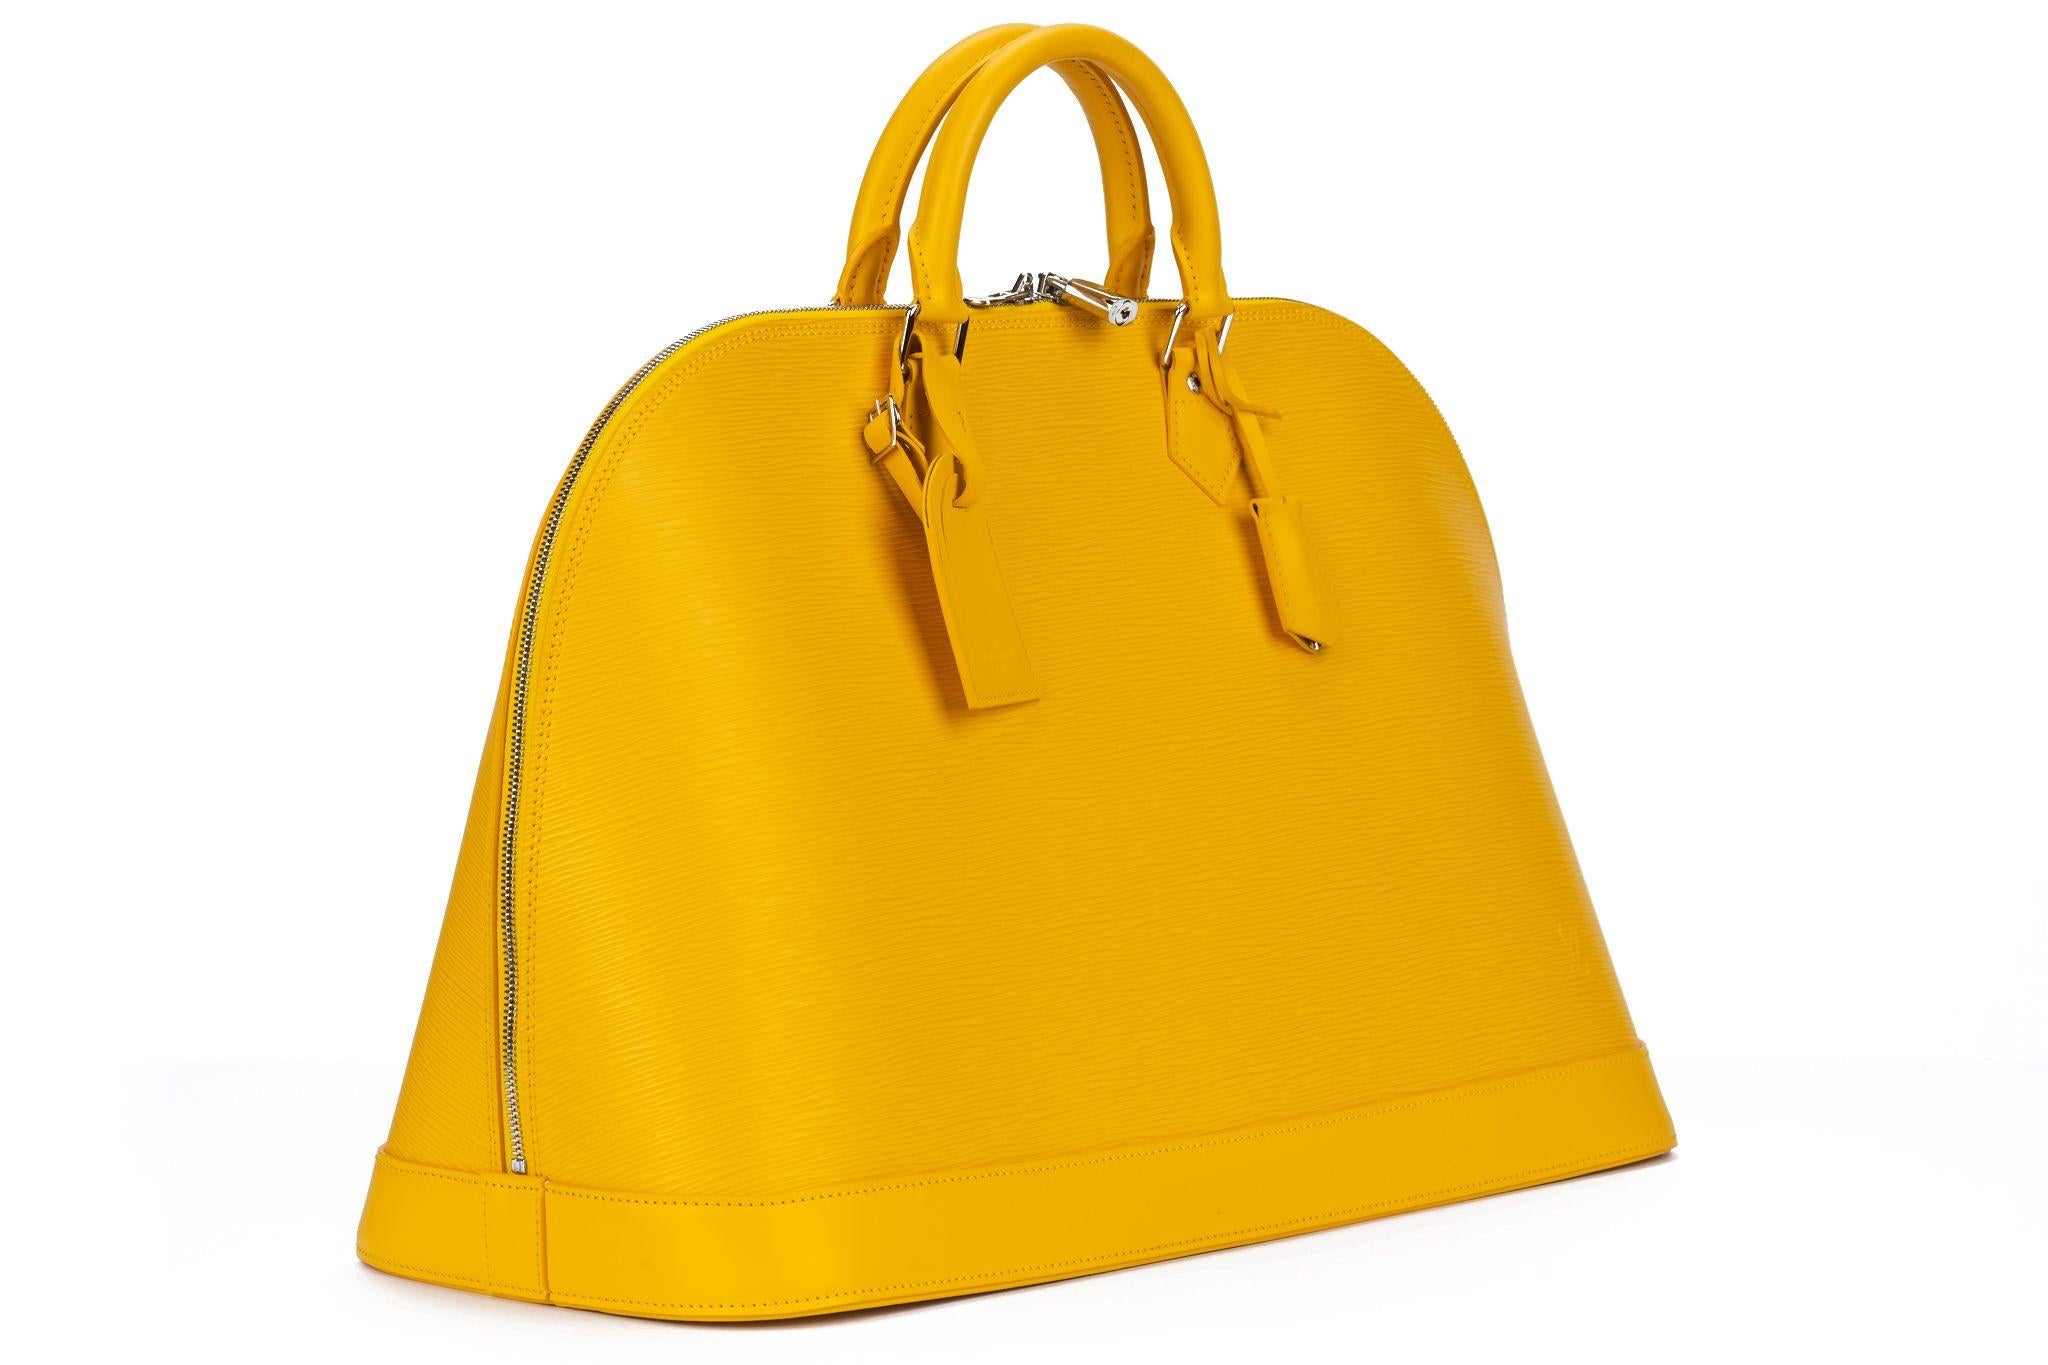 Louis Vuitton Alma Handbag yellow Epi Leather rare and collectible xxl size. The bag is in new condition, protective plastic still on the feet.The handles measure 3.5 inches. The bag comes with the original dustcover, clochette, tirette, lock and